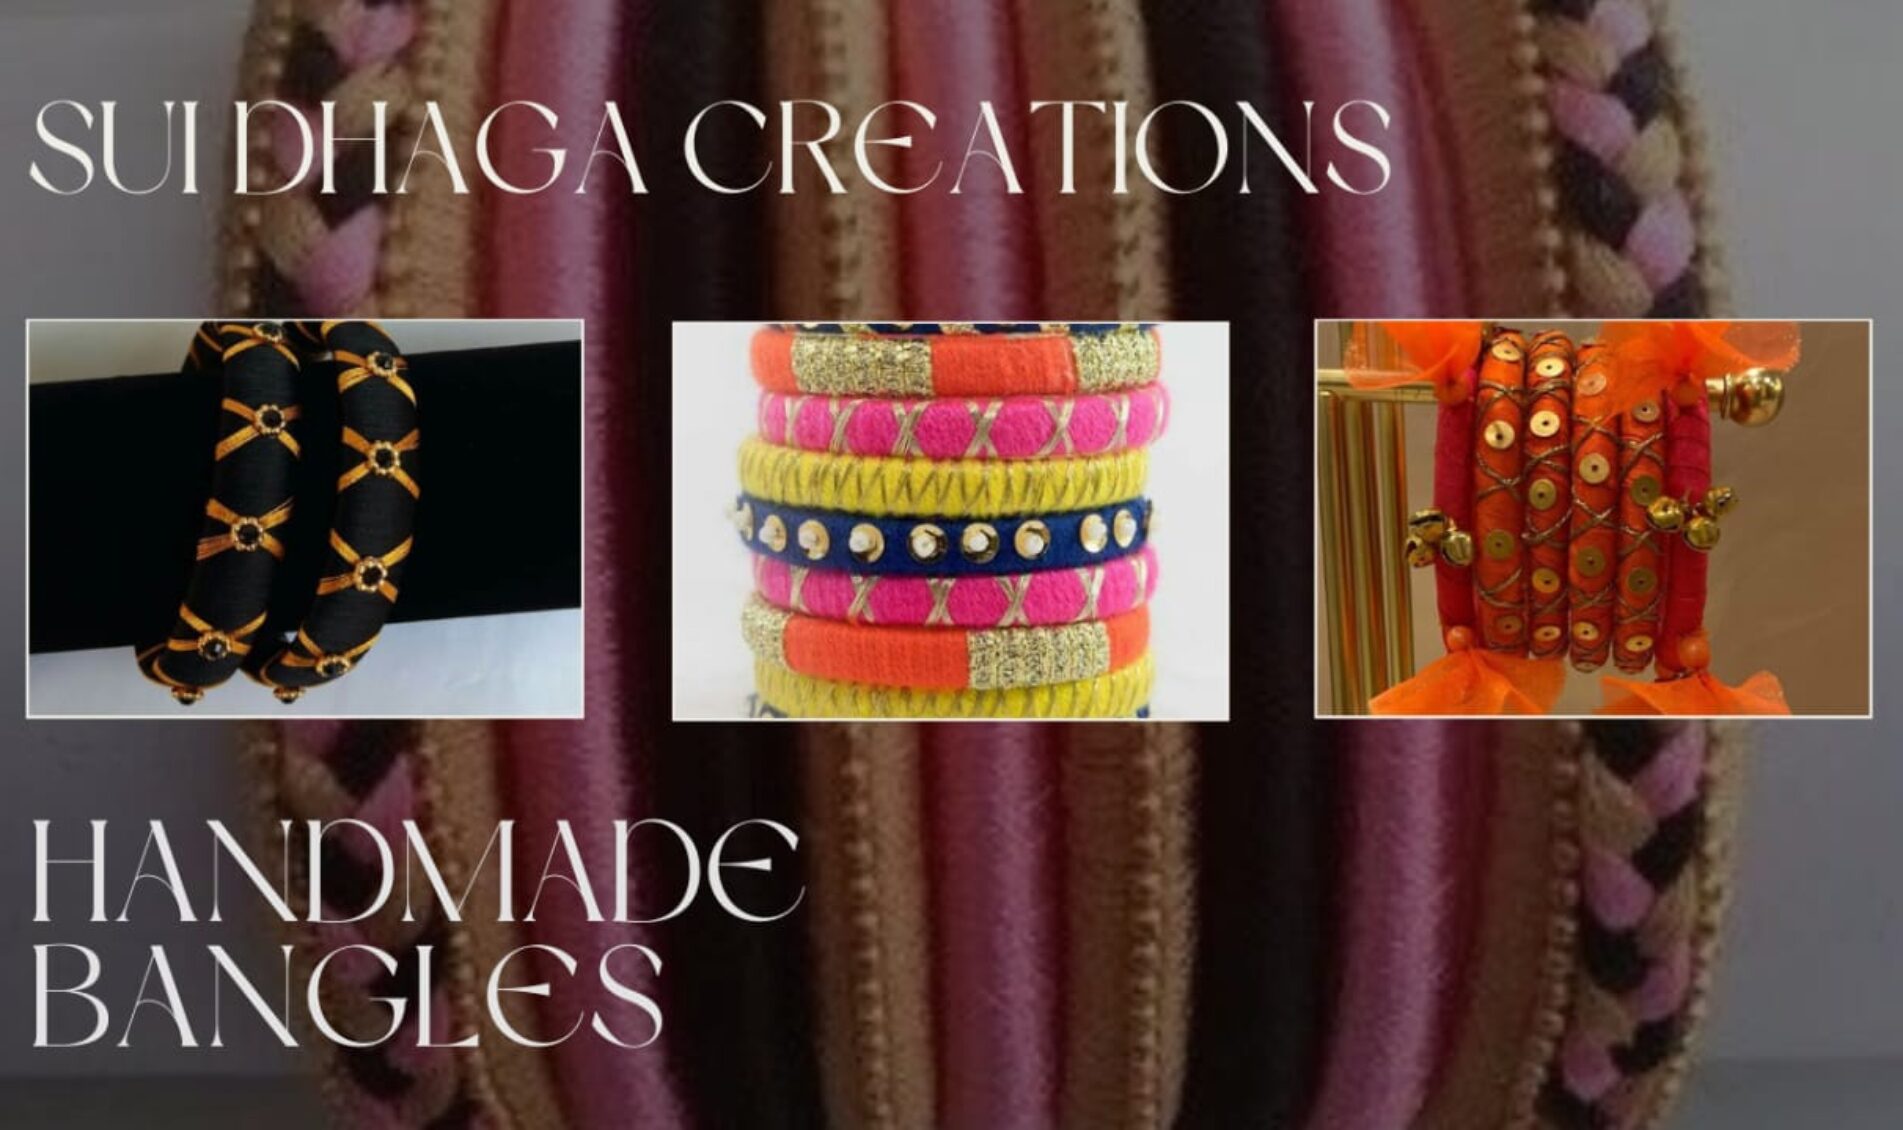 Handmade bangles which make your festival more colorful